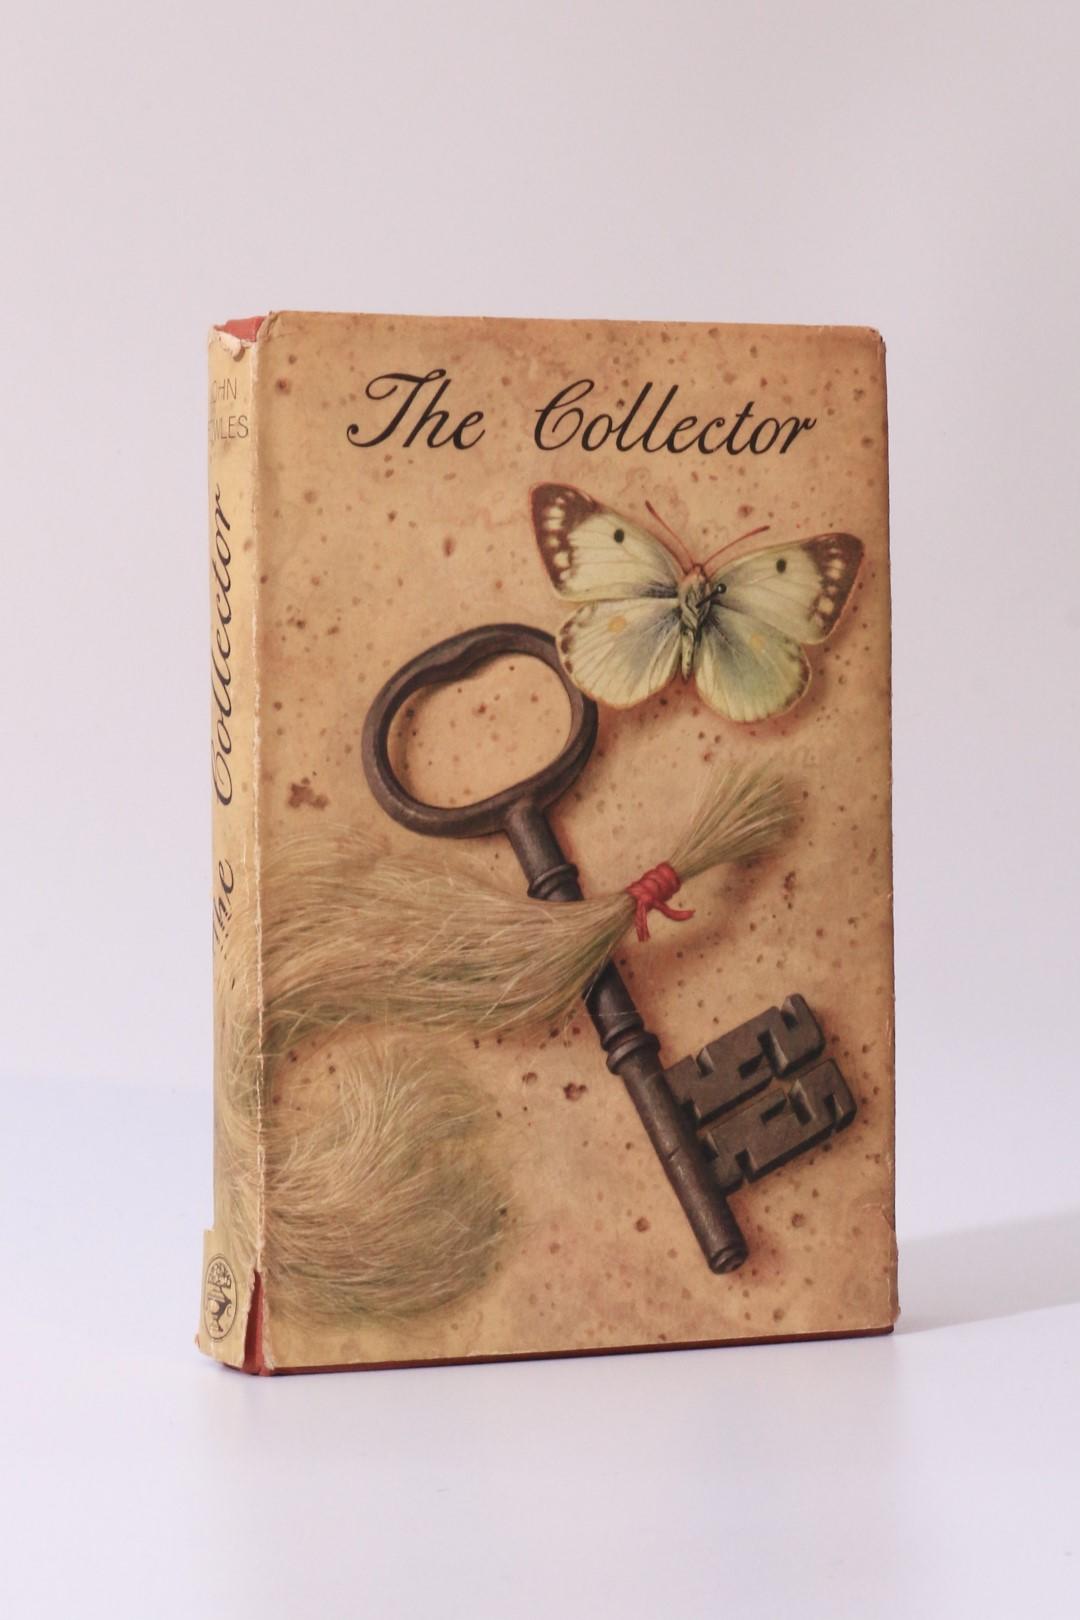 John Fowles - The Collector - Jonathan Cape, 1963, First Edition.